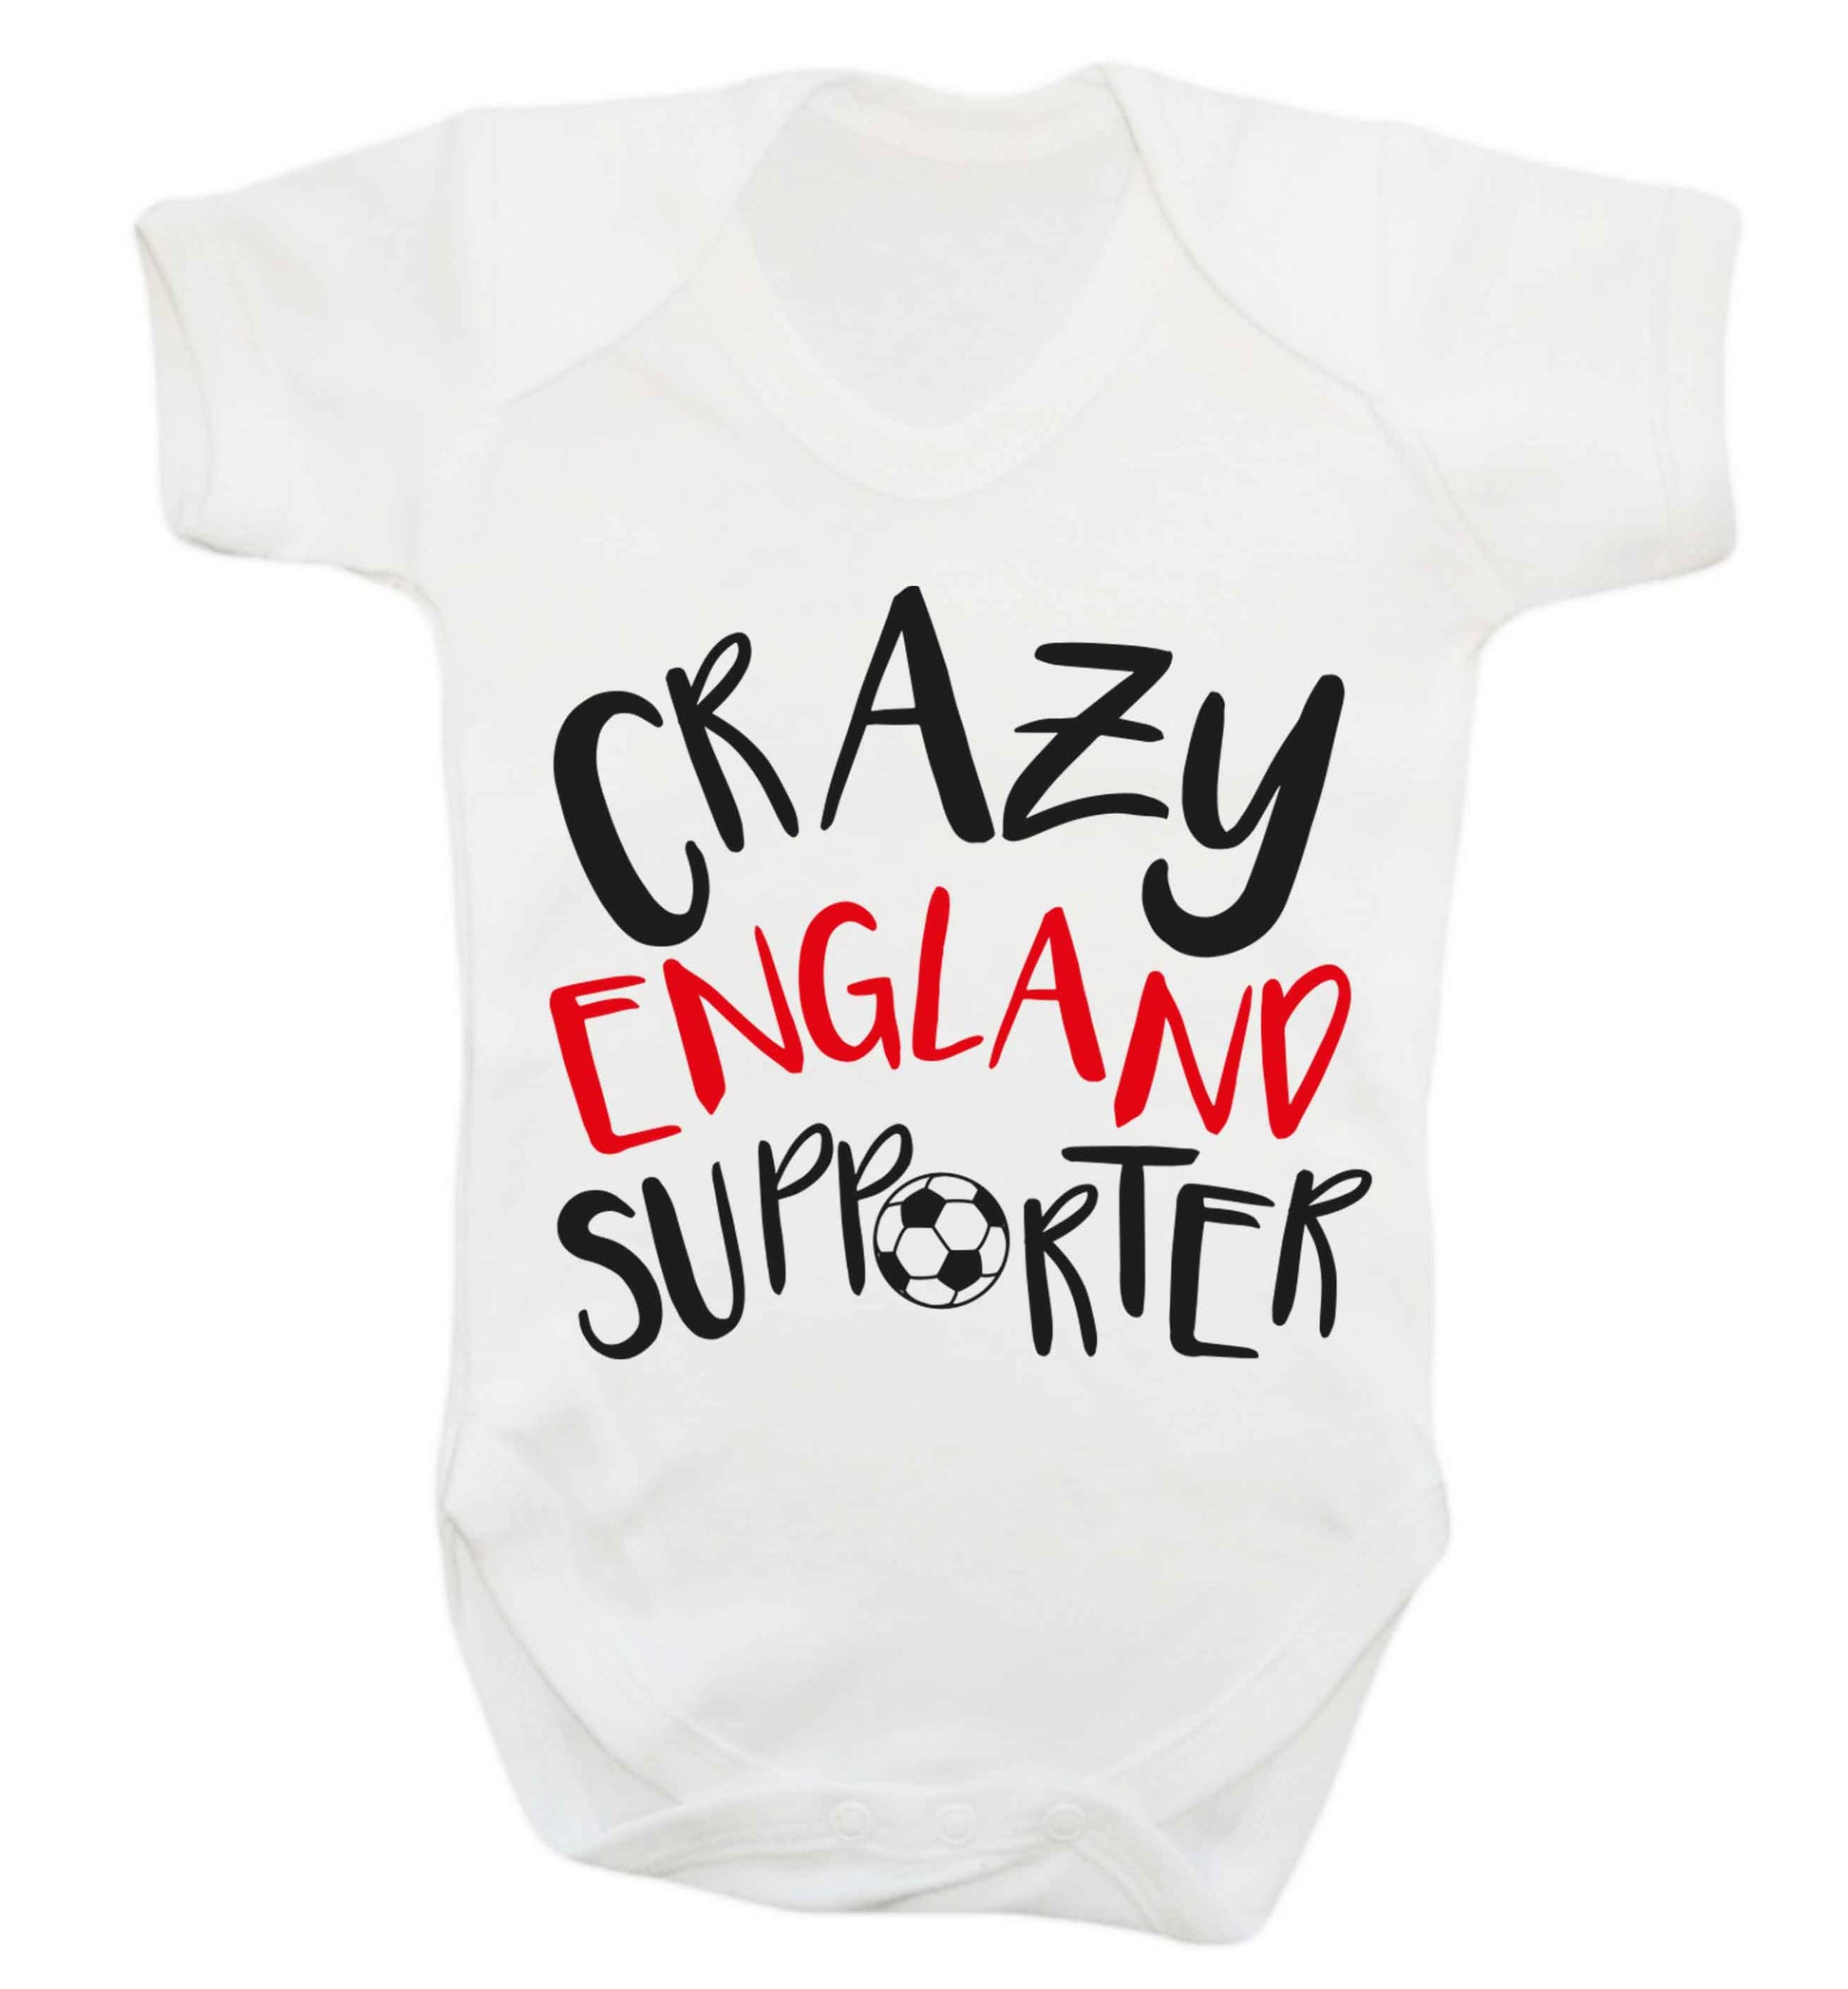 Crazy England supporter Baby Vest white 18-24 months